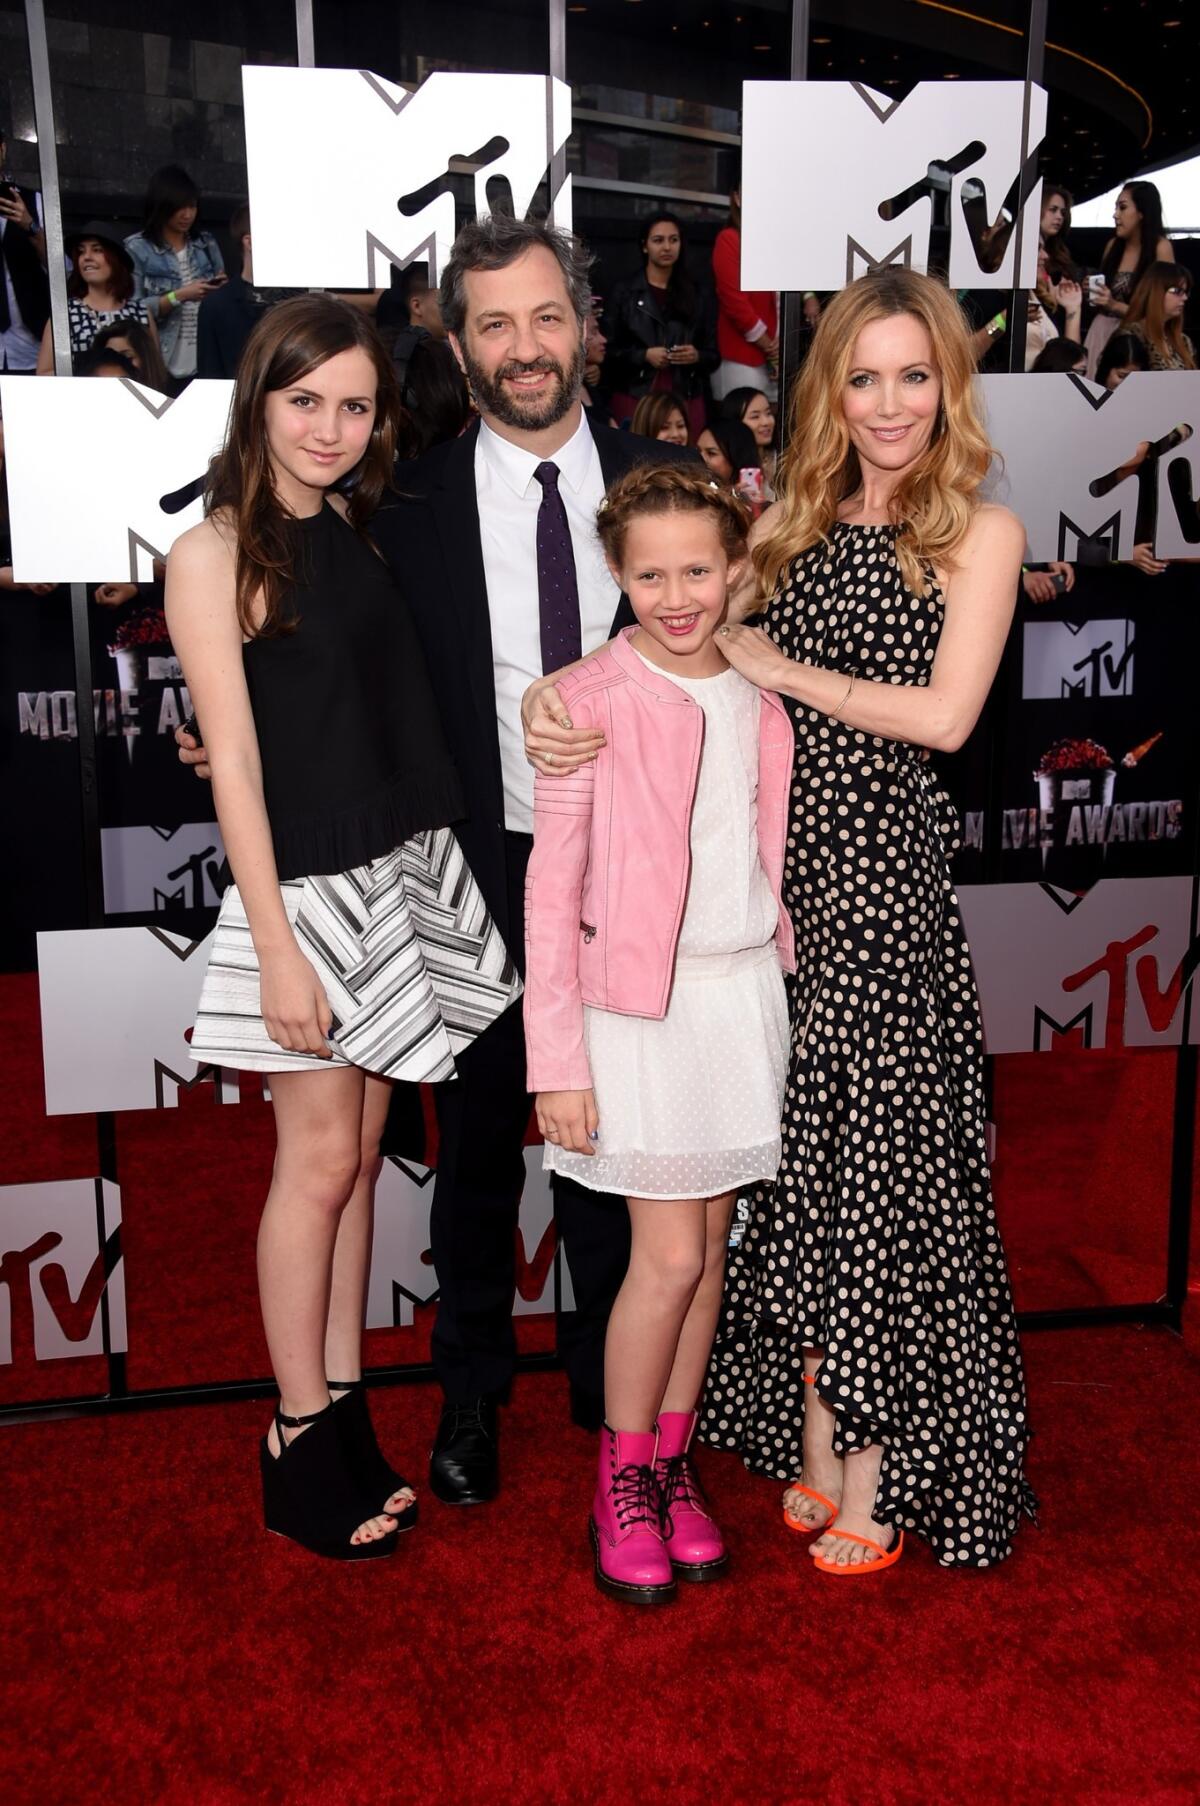 Actress Maude Apatow, producer-director Judd Apatow, actress Iris Apatow, and actress Leslie Mann at a premiere.